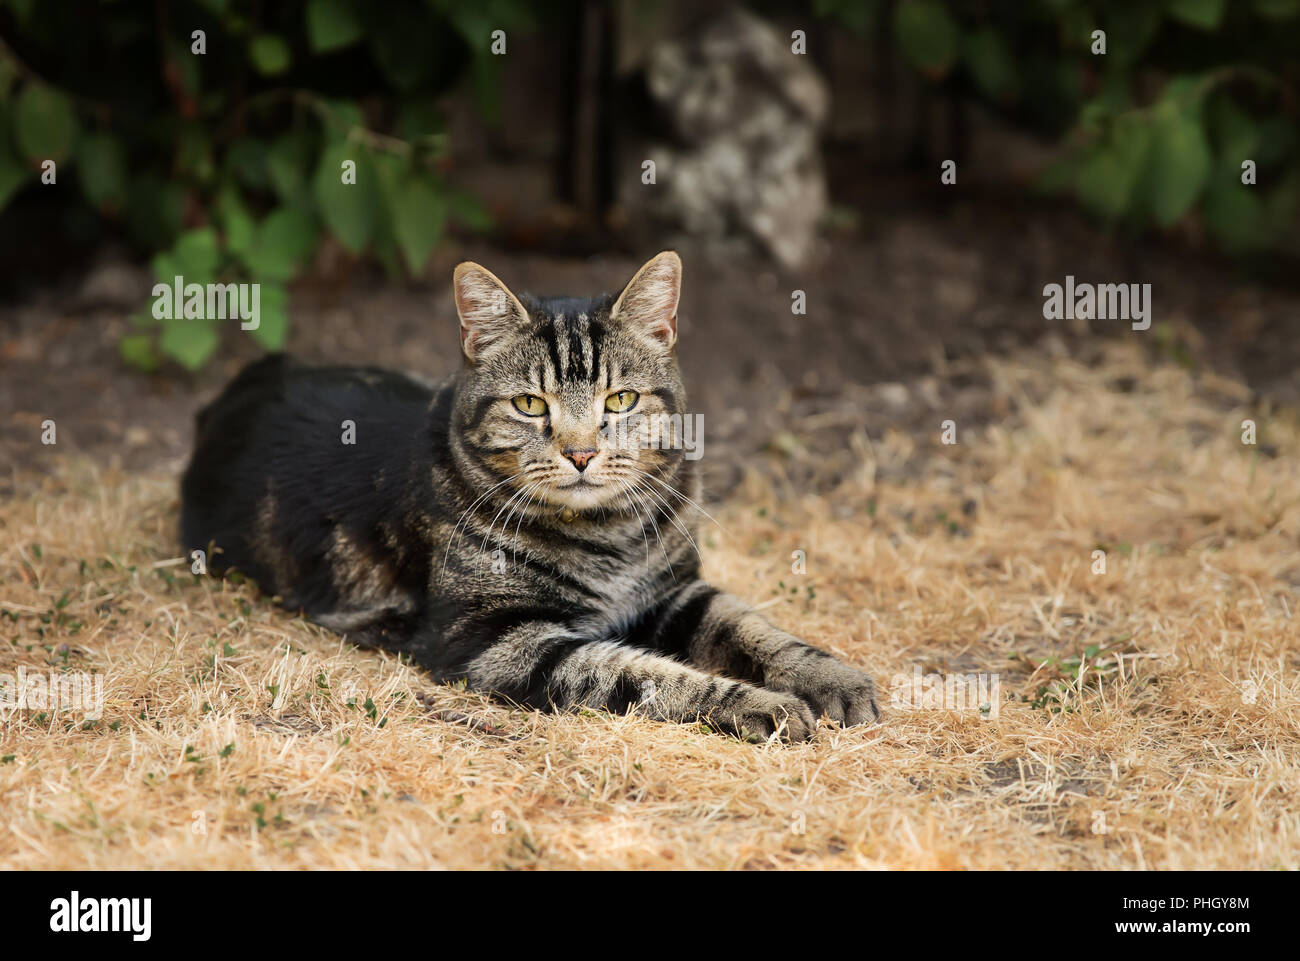 Close up of a tabby cat lying on dry grass in the back yard, UK. Stock Photo